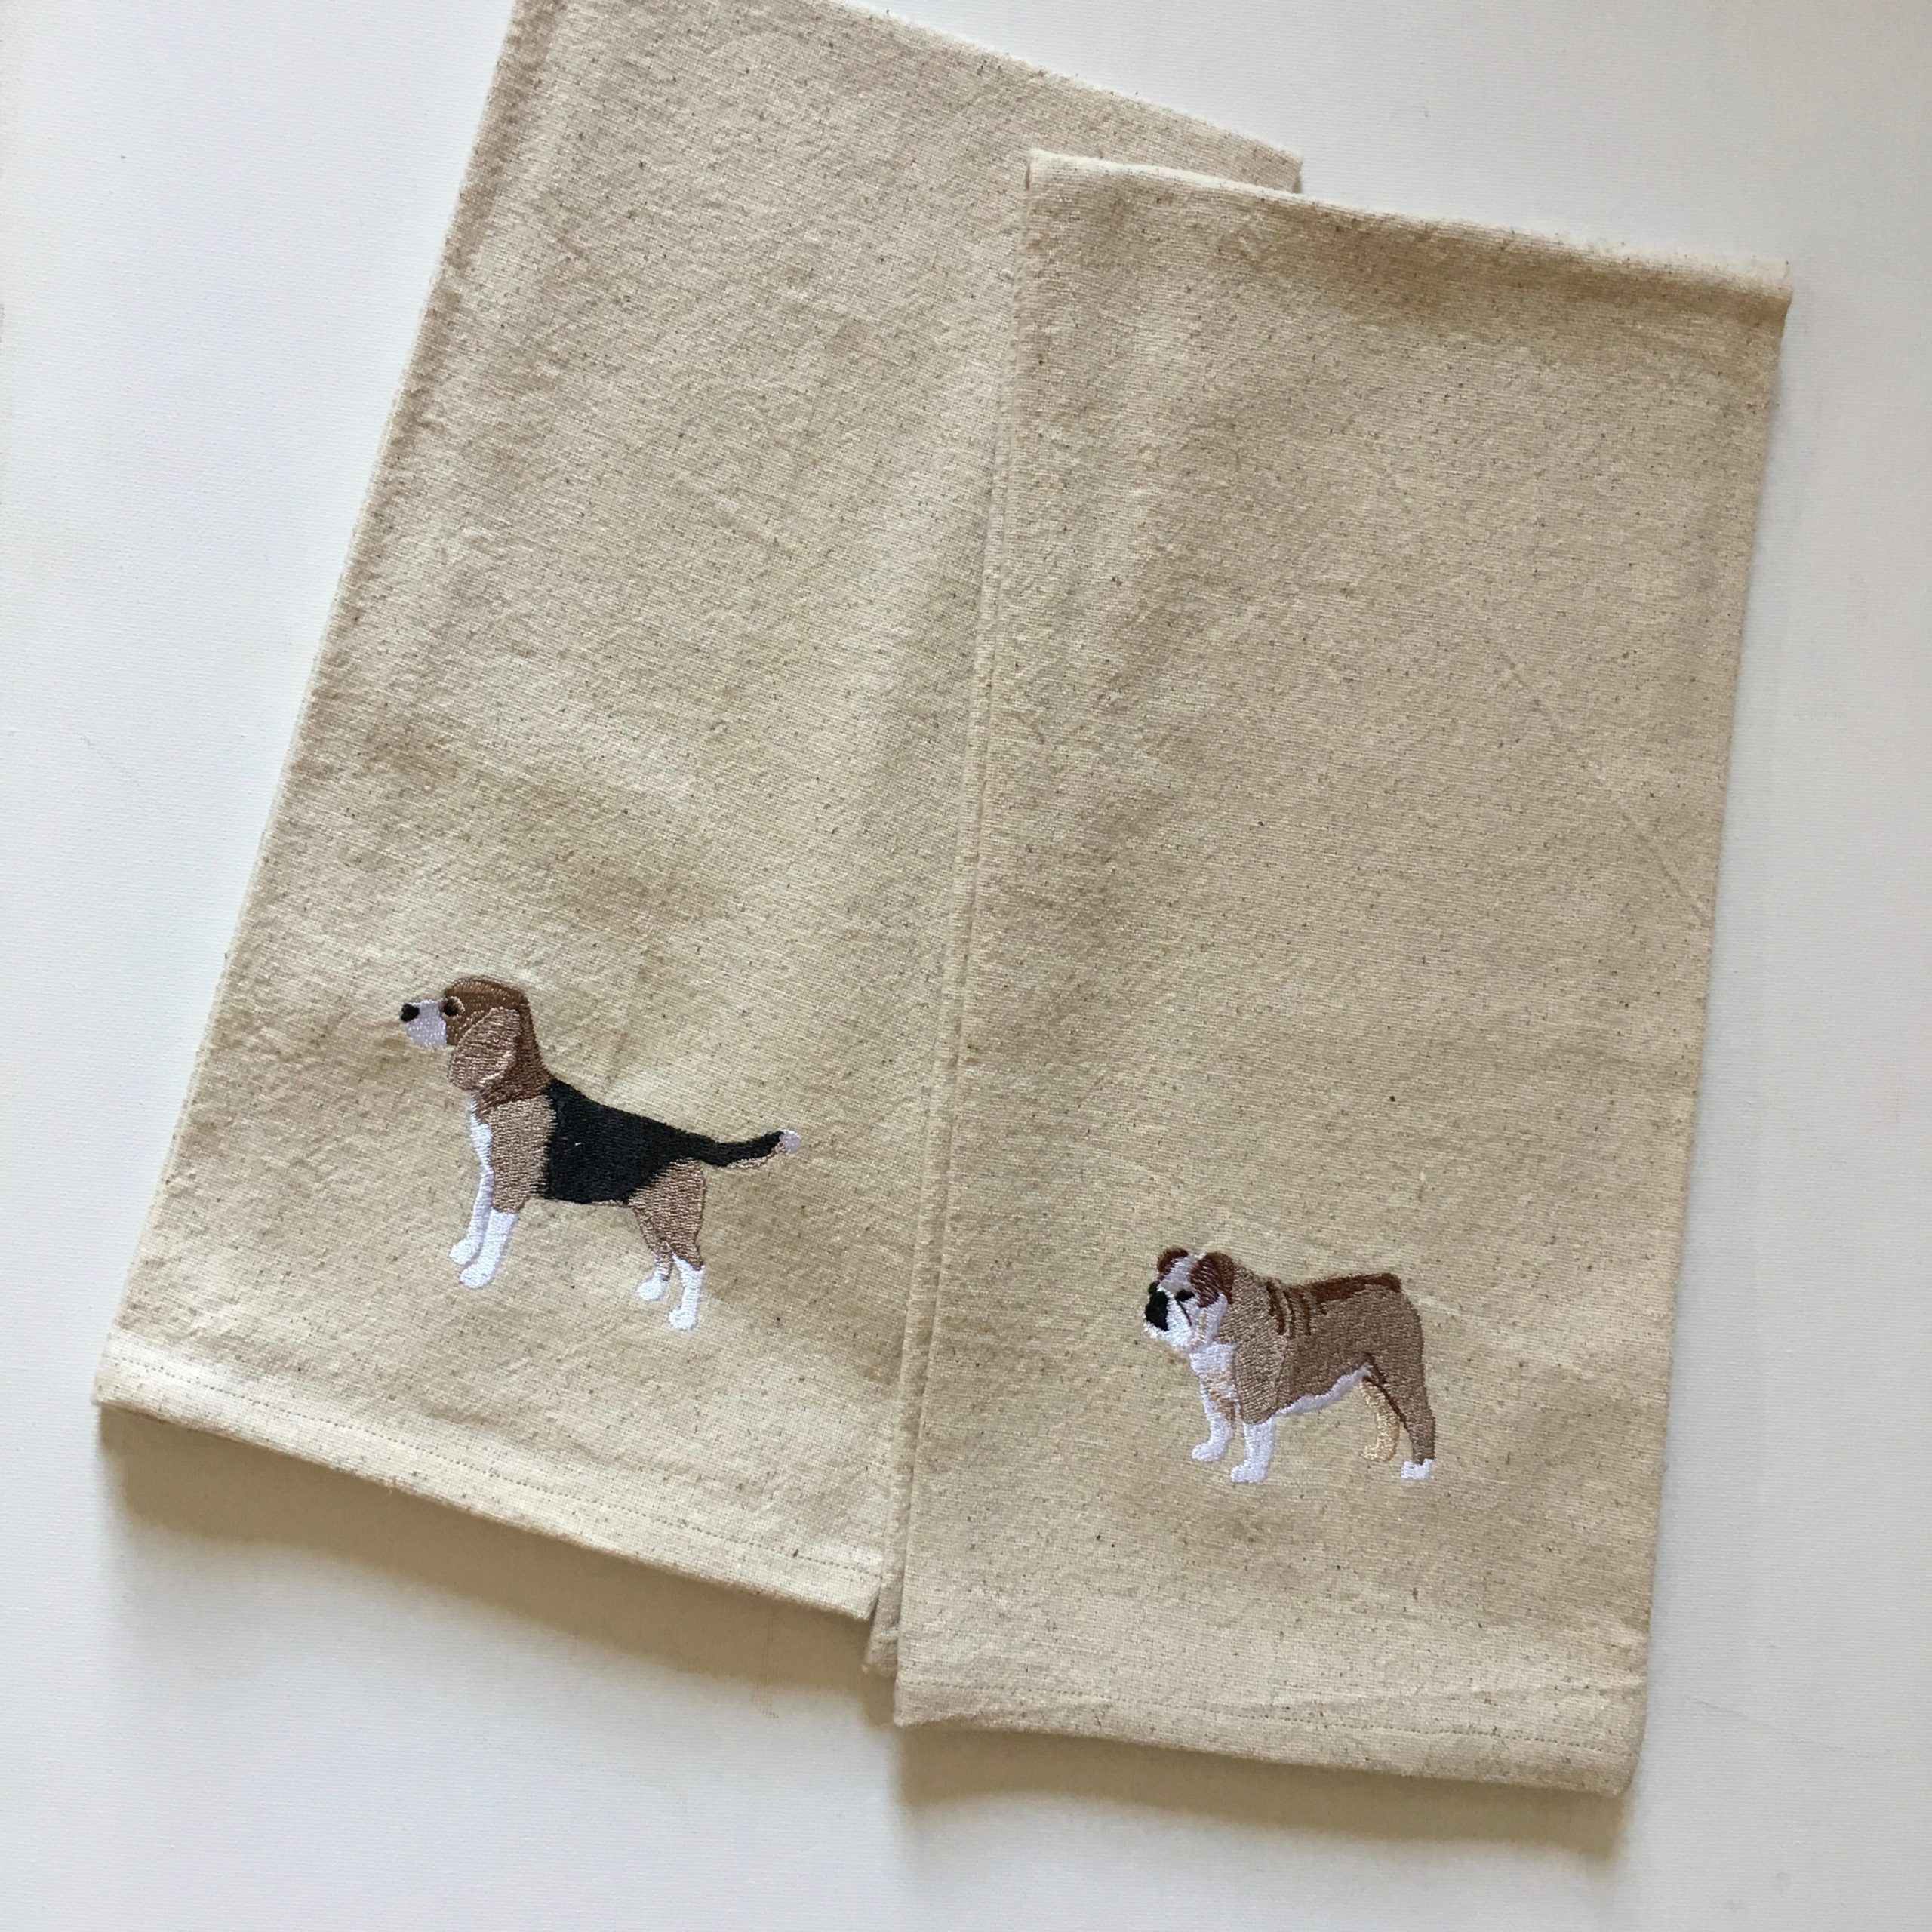 2 EMBROIDERED KITCHEN TERRY HAND TOWELS,15x25,DOG IN SUMMER